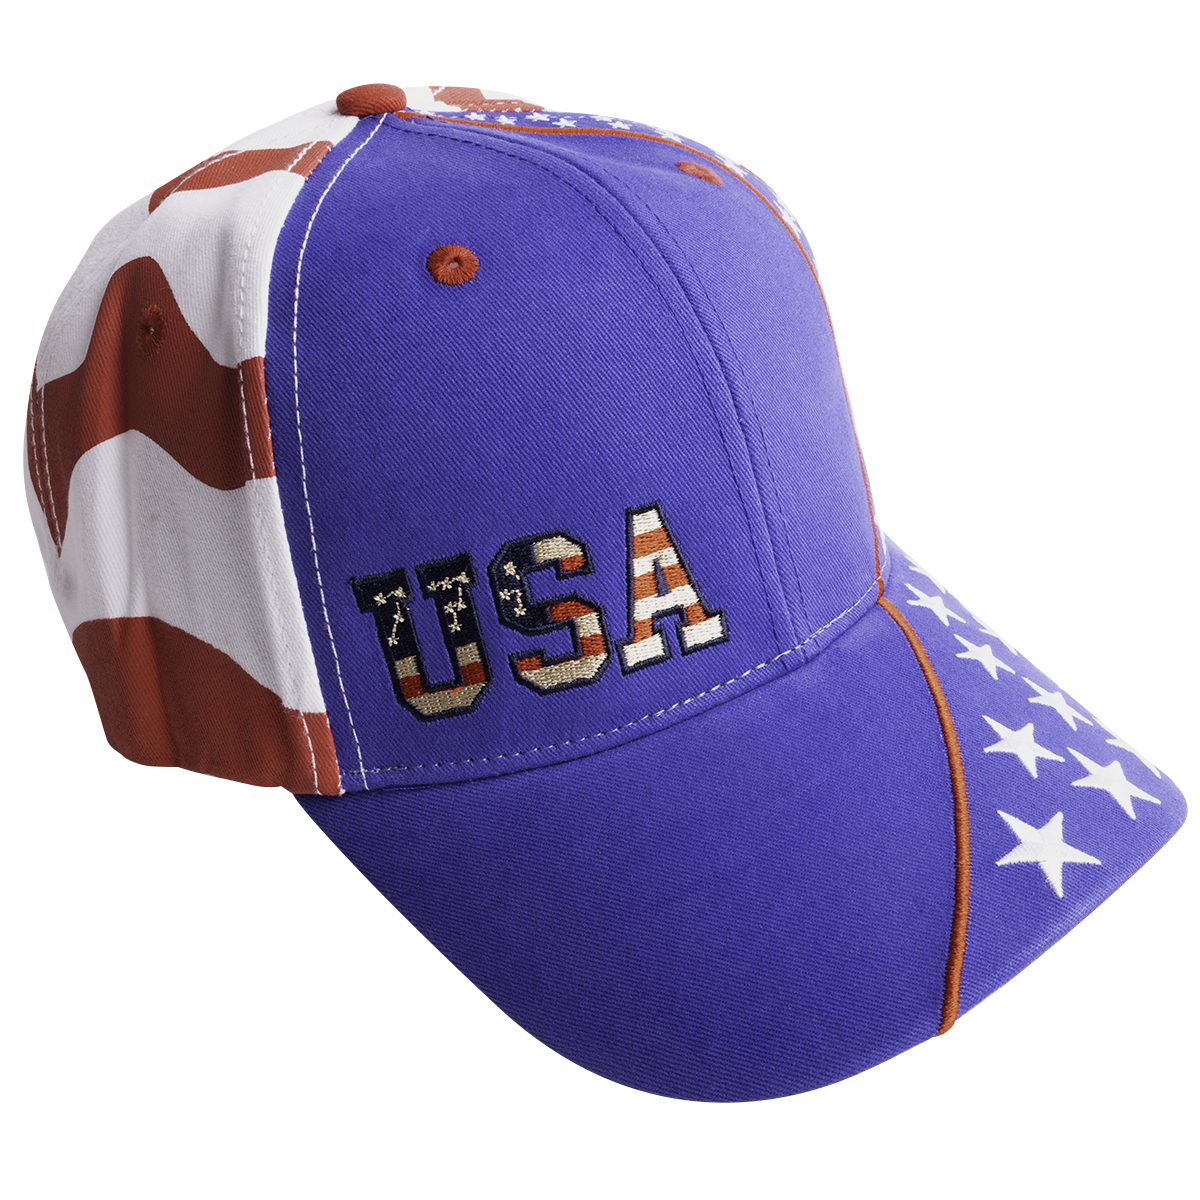 BlackCanyon Outfitters Patriotic USA Trucker Cap BCOCAPSTRS Stars and Stripes Snapback Ball Cap